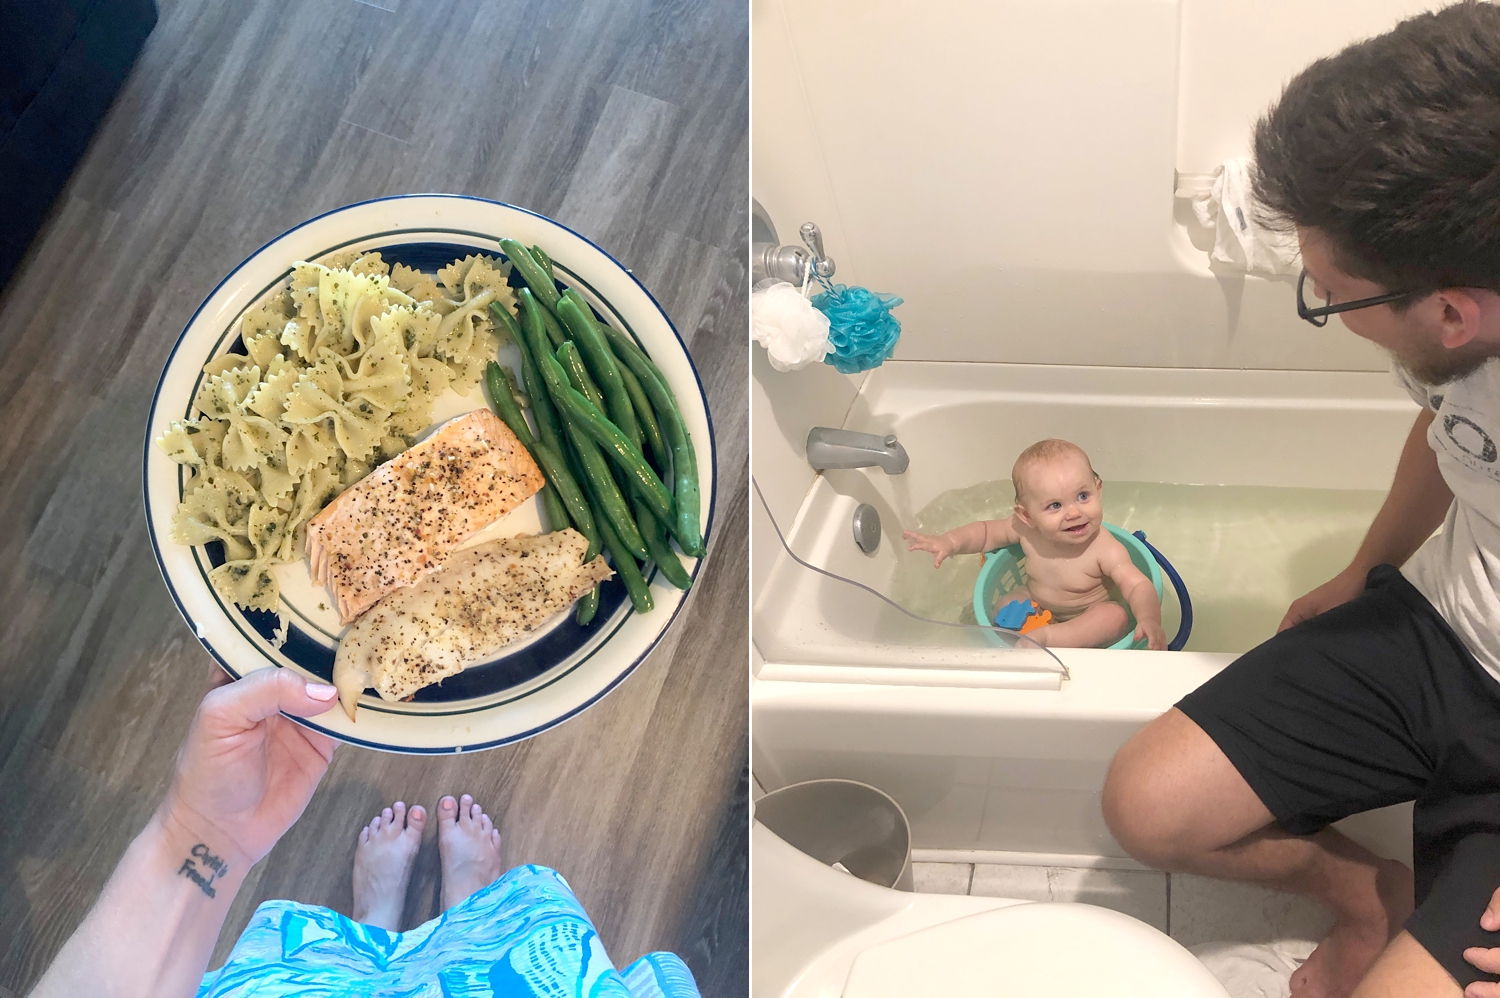  We made dinner in most nights because it was much cheaper and healthier! But don’t get me wrong, we got delicious pizza and burgers one night! I also didn’t want to bring the baby bath tub so we used a big beach bucket that held all the toys. It wor